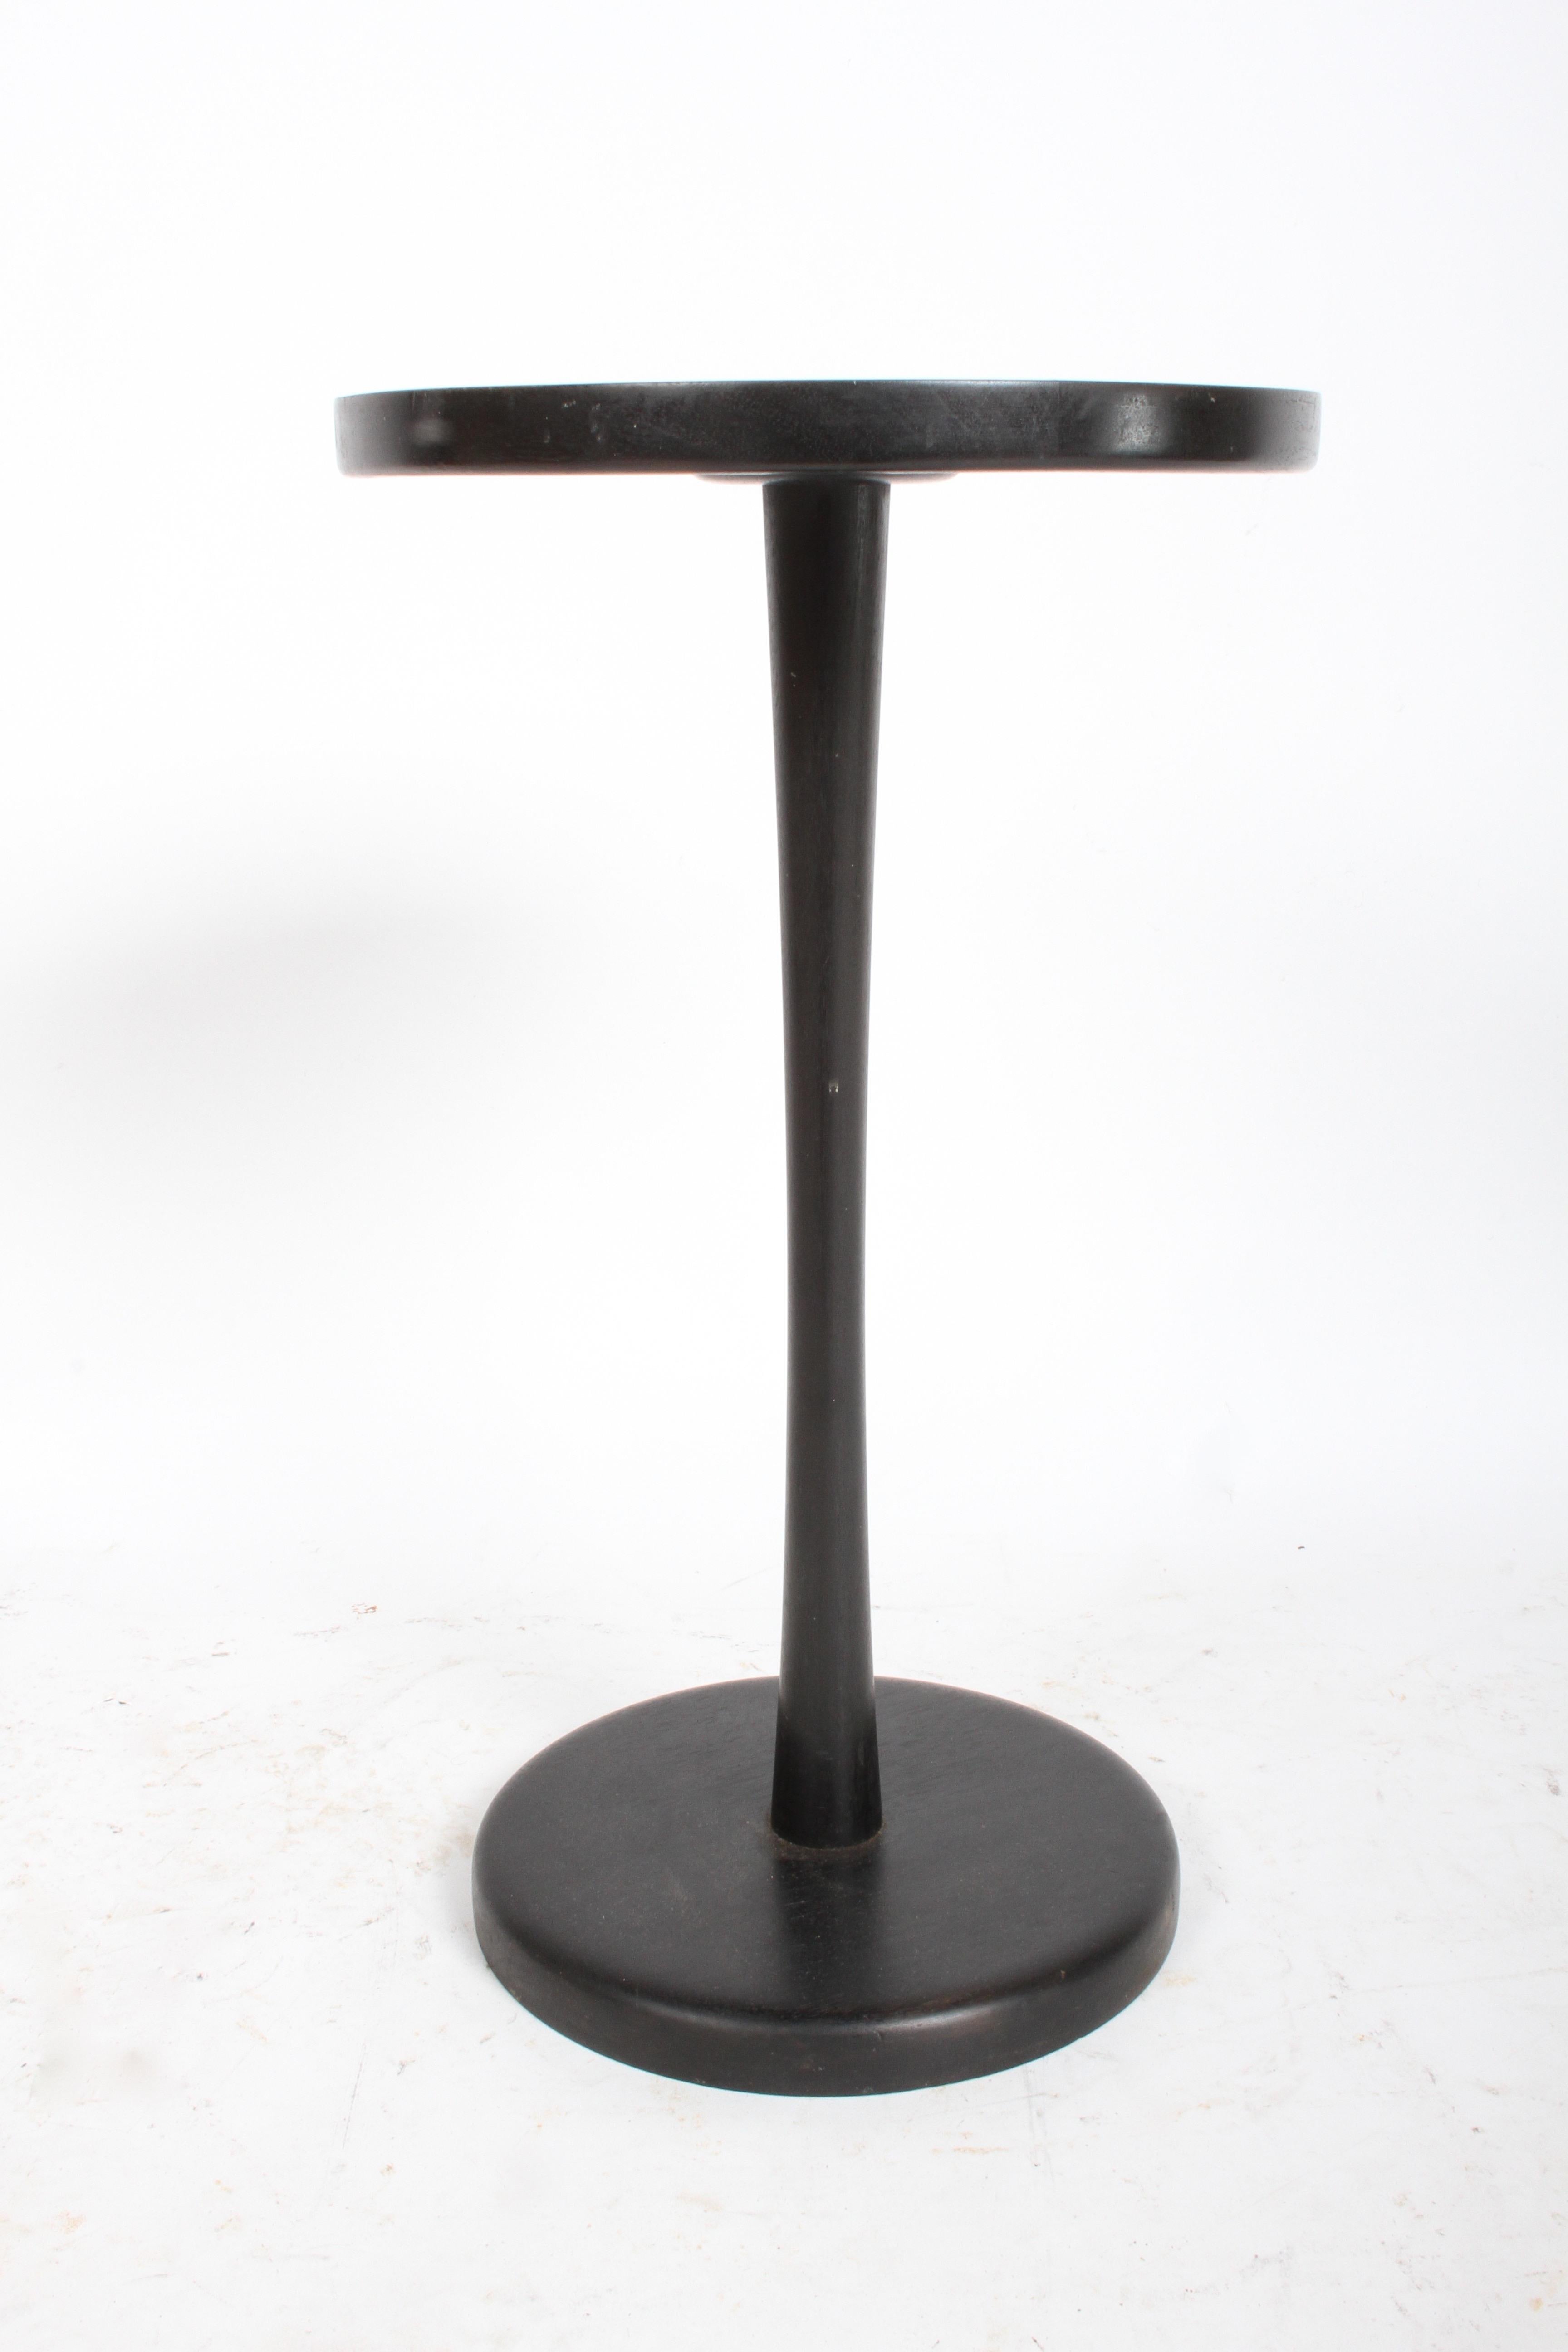 Gordon Martz for Marshall Studios round tile top pedestal or side table with original dark stain. Nice all original condition, some minor scuffs and wear to wood, no damage to round golden colored ceramic tiles. Has weighted cast metal base